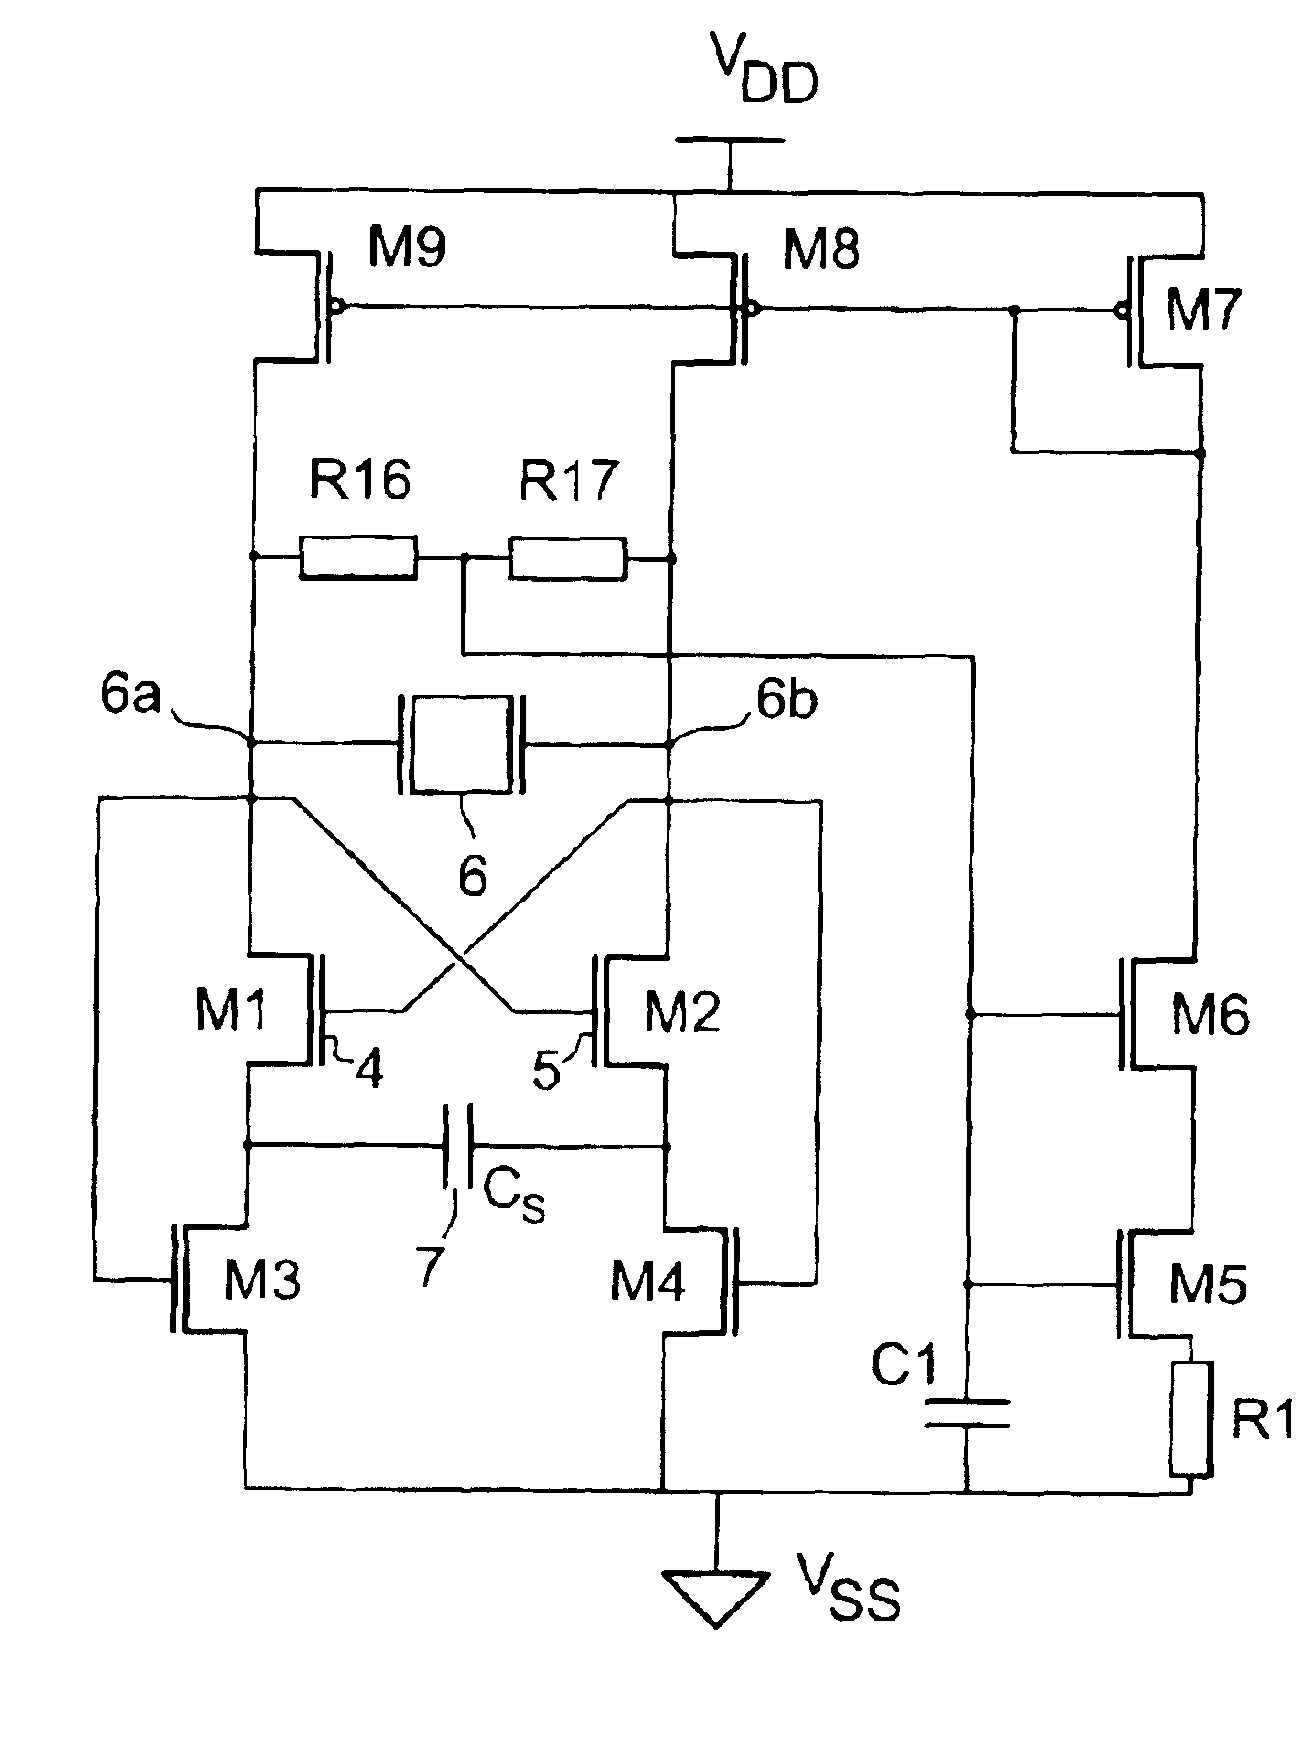 Differential oscillator circuit including an electro-mechanical resonator